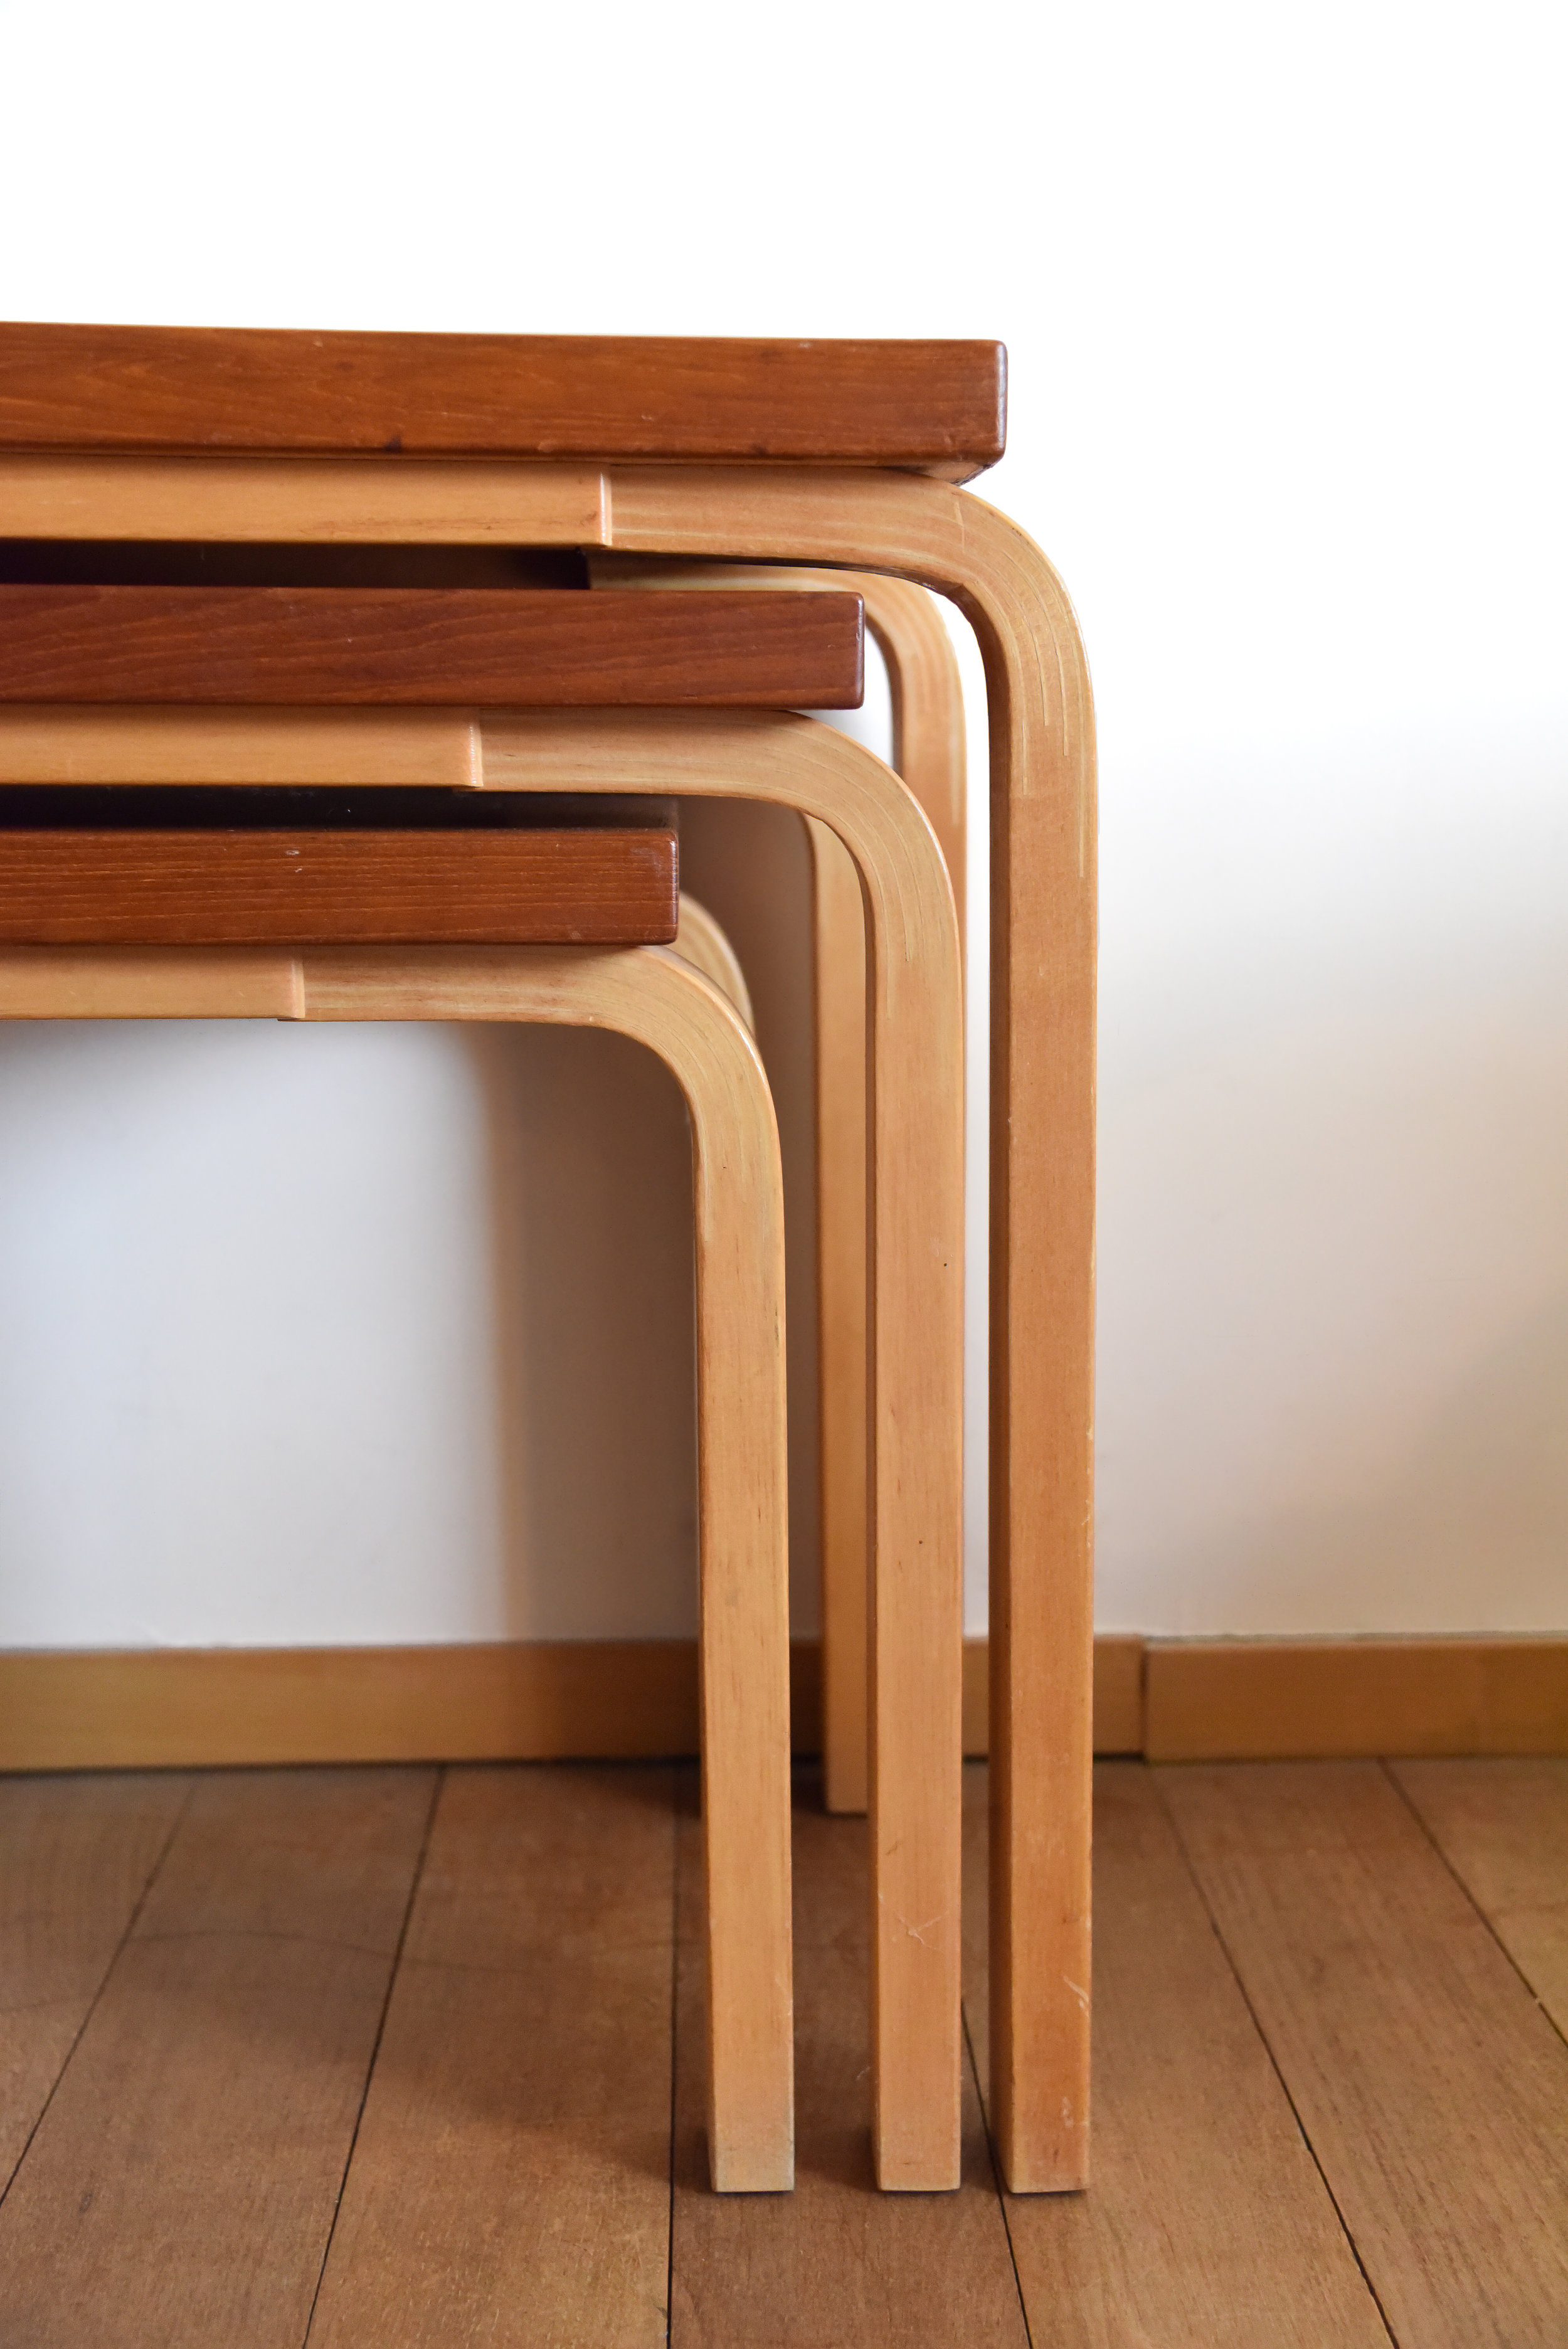 Early nesting tables with wood variation